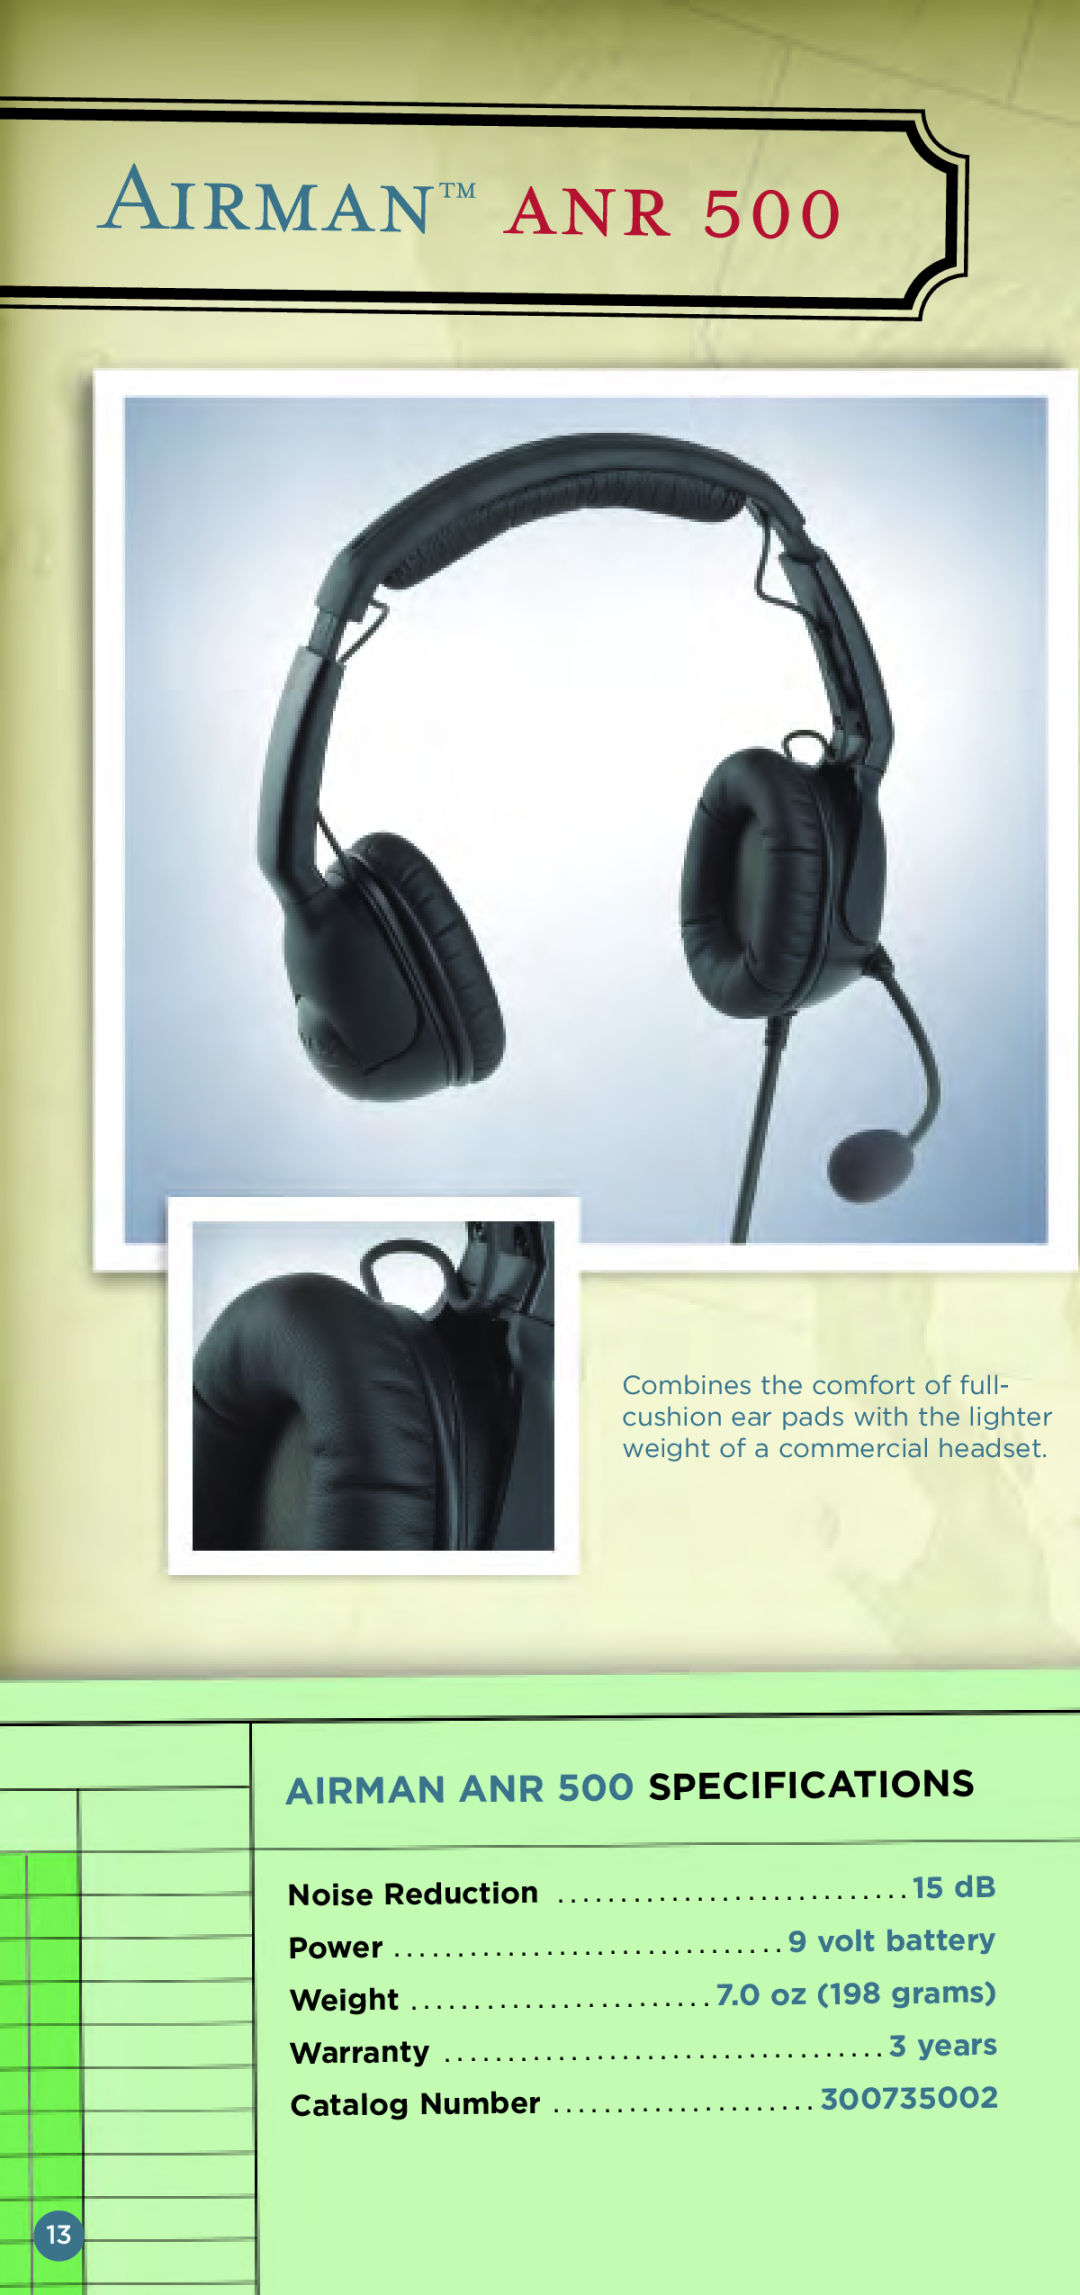 Telex Aviation Headsets Airman, AIRMAN ANR 500 SPECIFICATIONS, Noise Reduction, Catalog Number, Warranty, Power Weight 